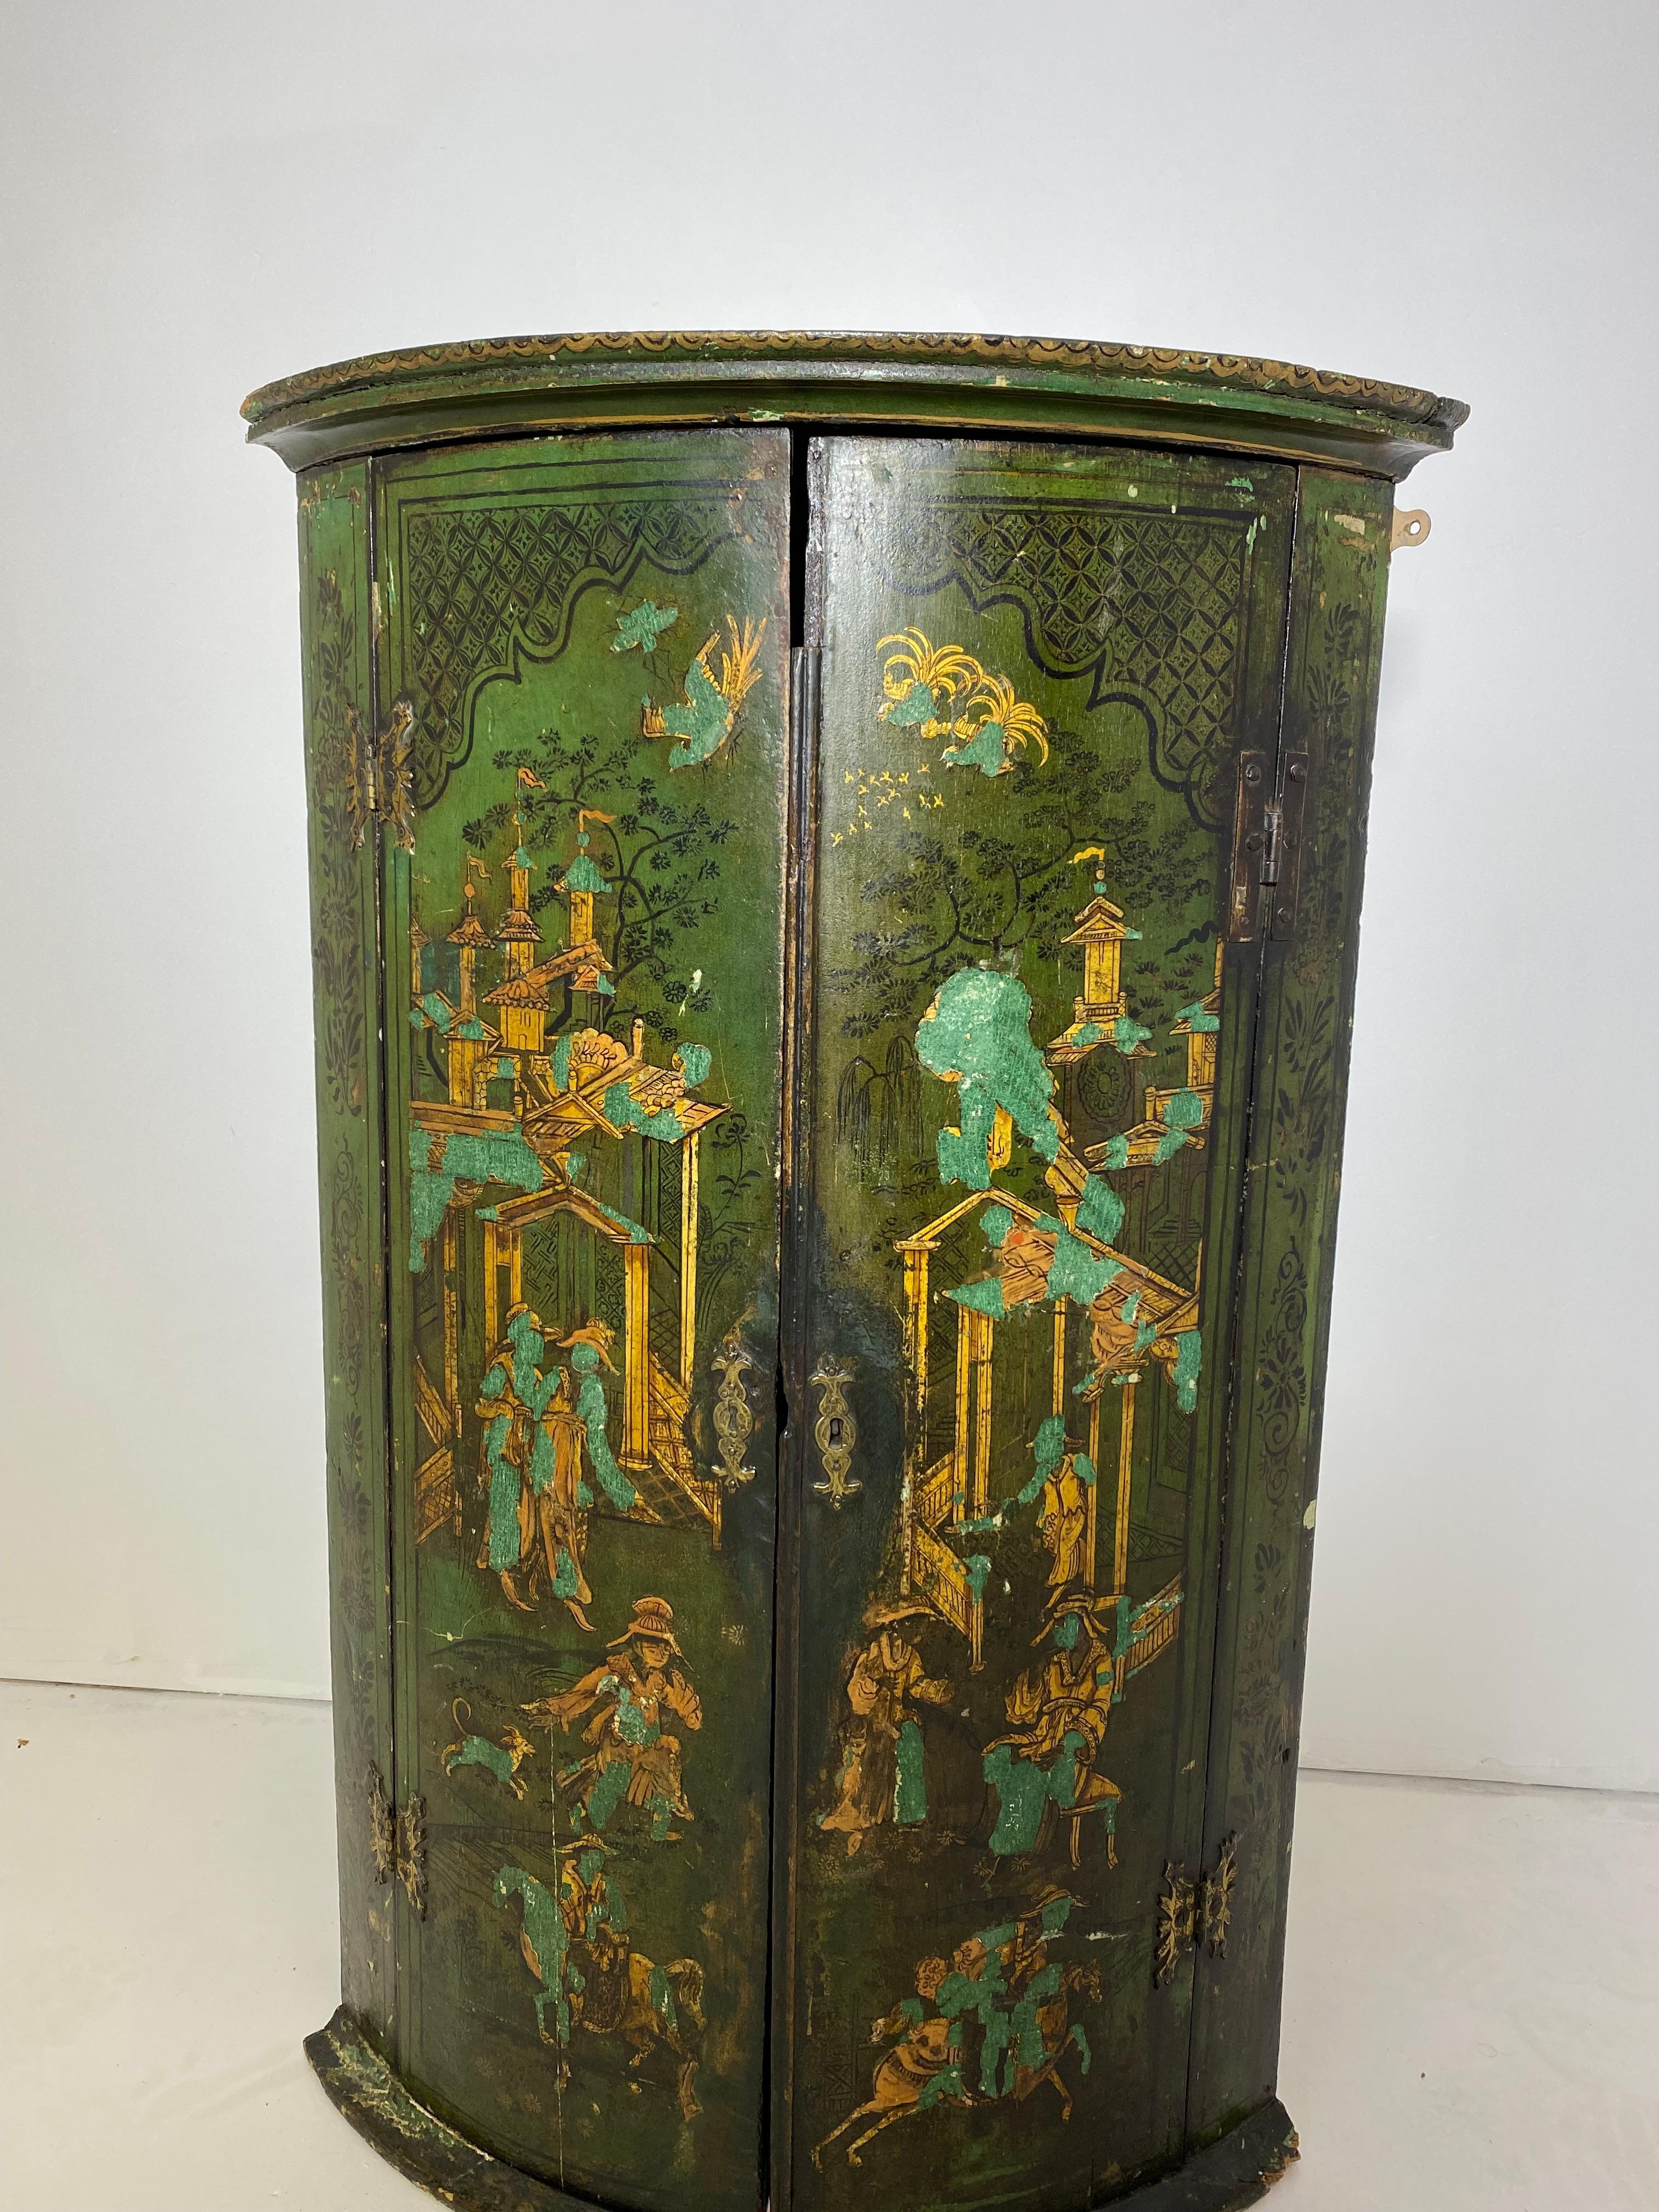 George III green-lacquered hanging bowfront corner cabinet. 4th quarter 18th century. Fitted with two cupboard doors, each with elaborate figural oriental scenes, on a molded plinth base.